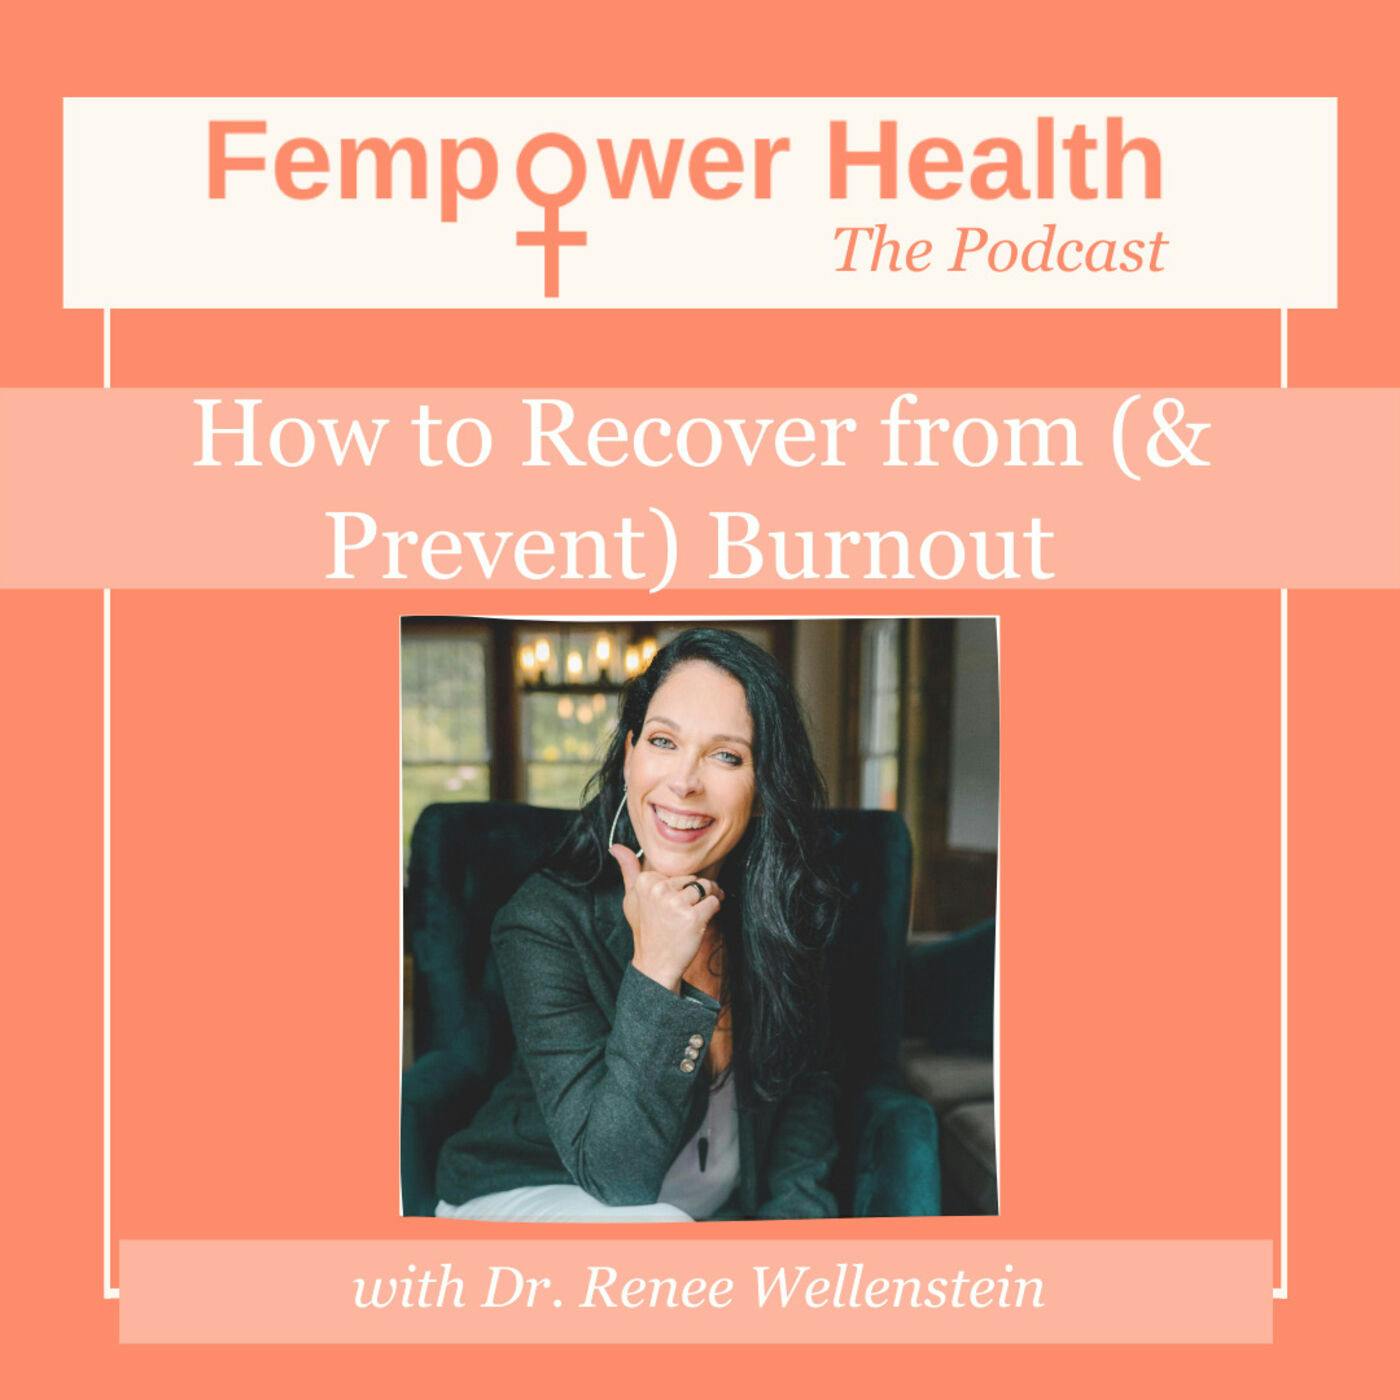 How to Recover from (& Prevent) Burnout | Dr. Renee Wellenstein